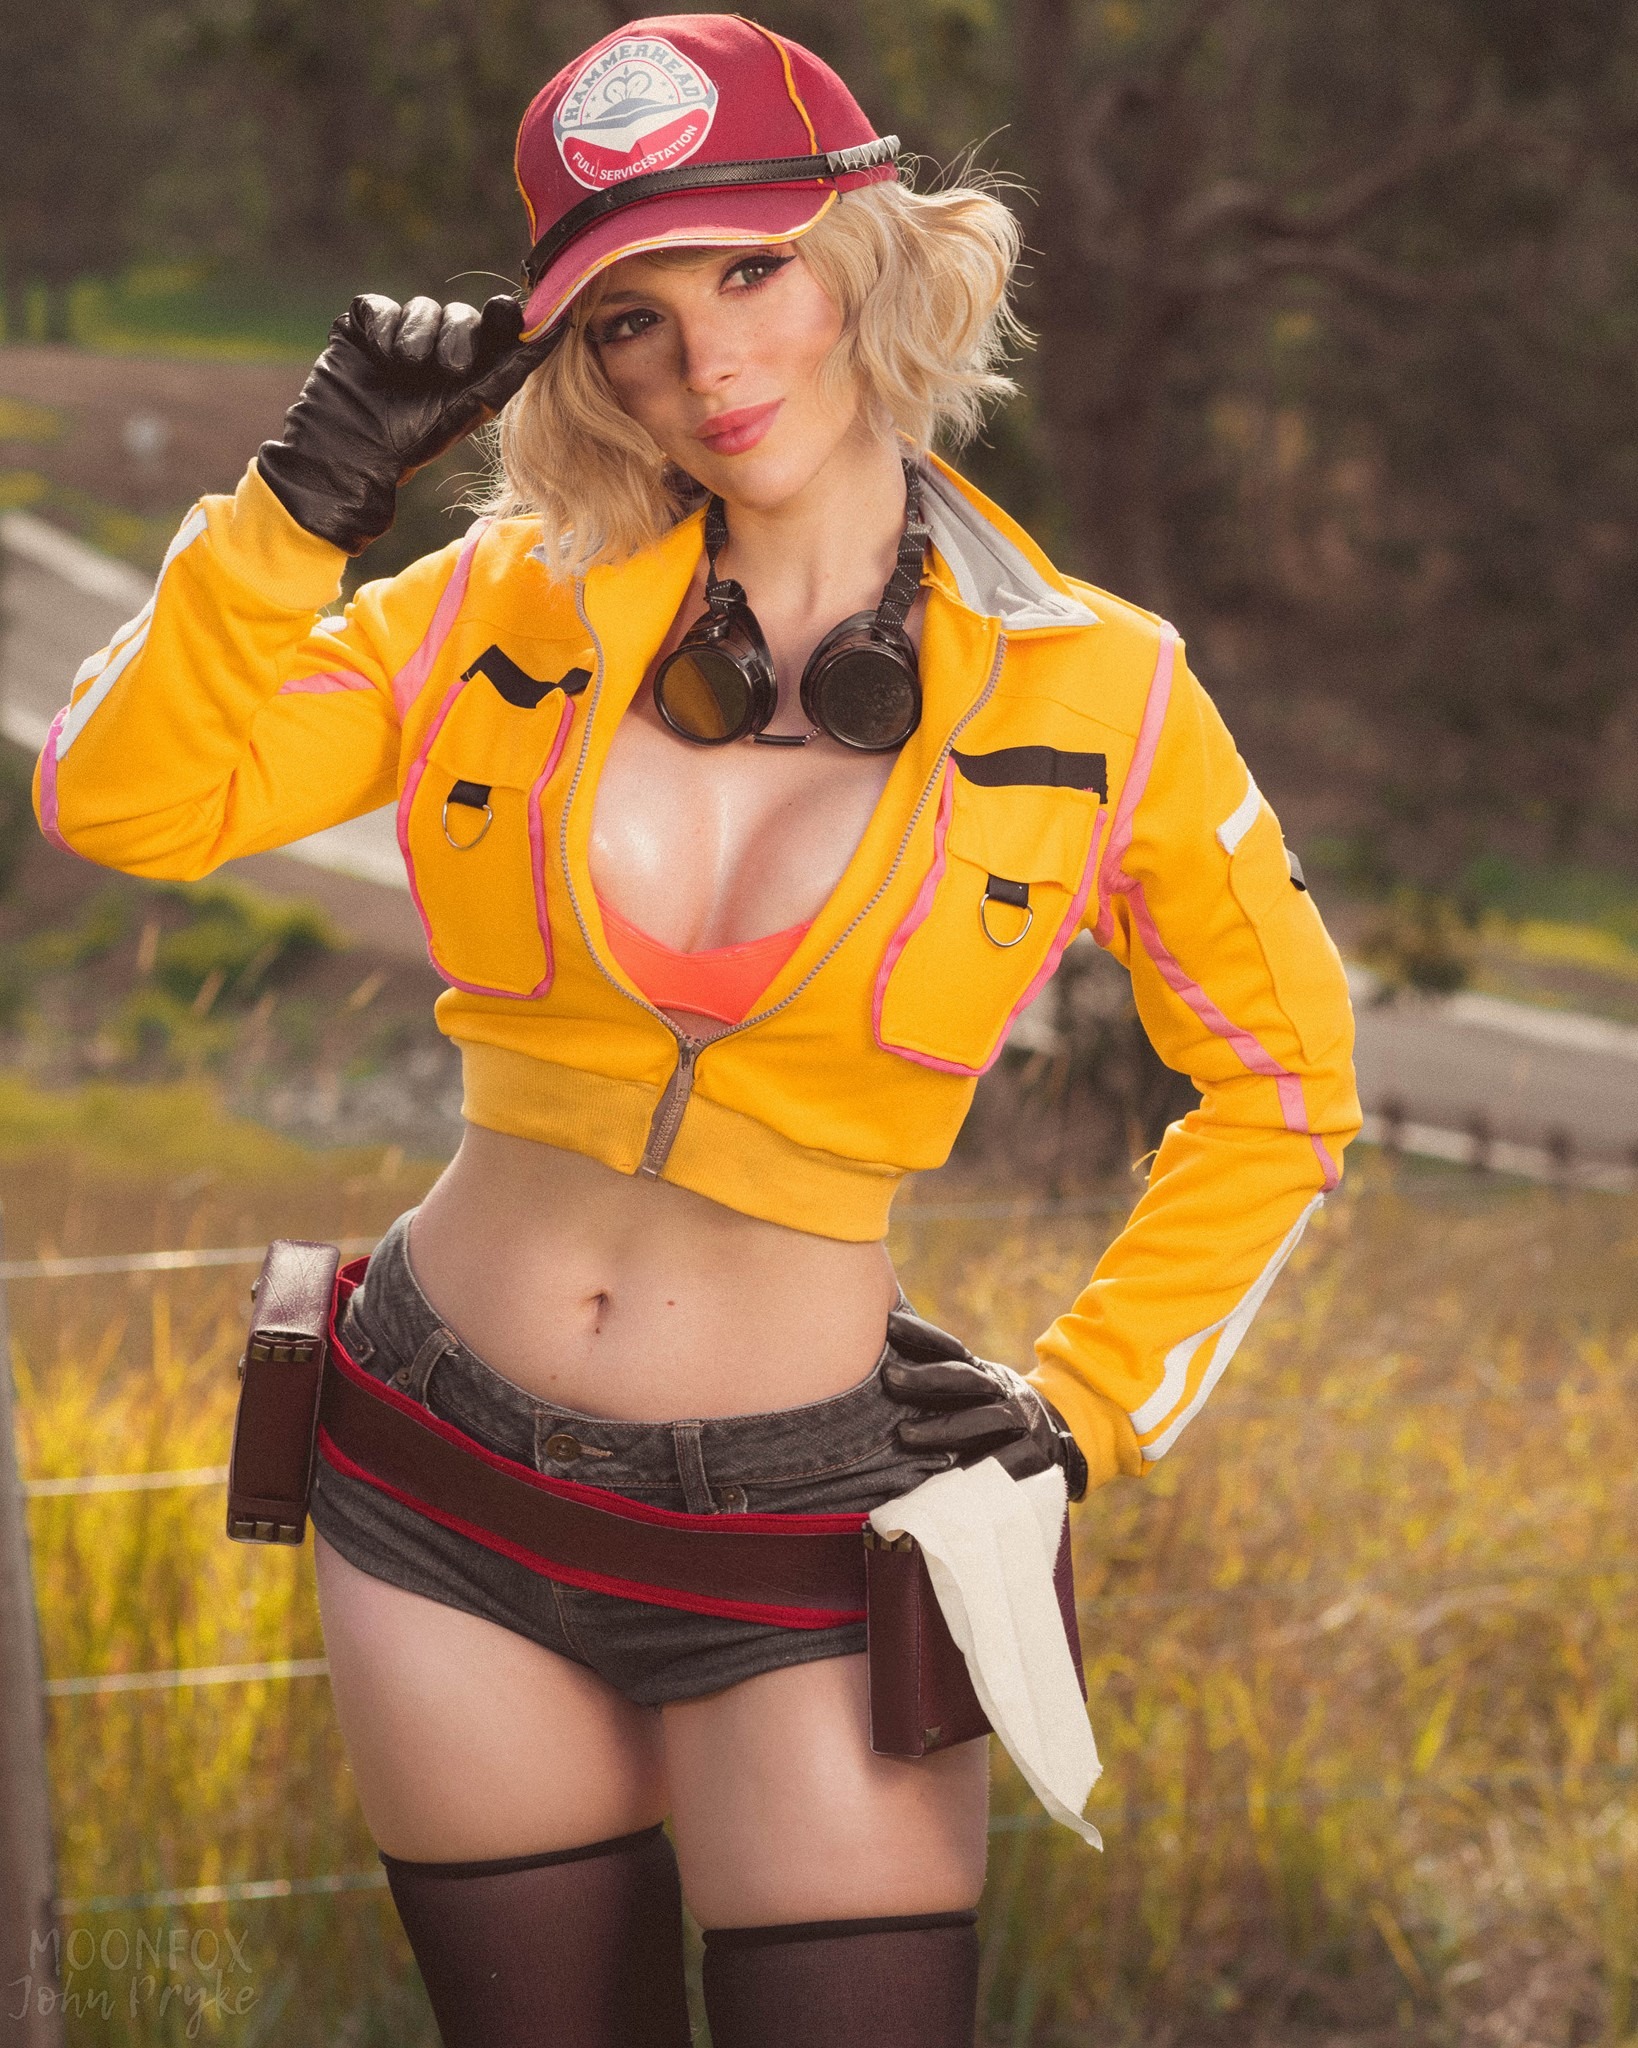 The Best Cosplay Girls Hot Top 100 Best Female Cosplayers Gamers Decide